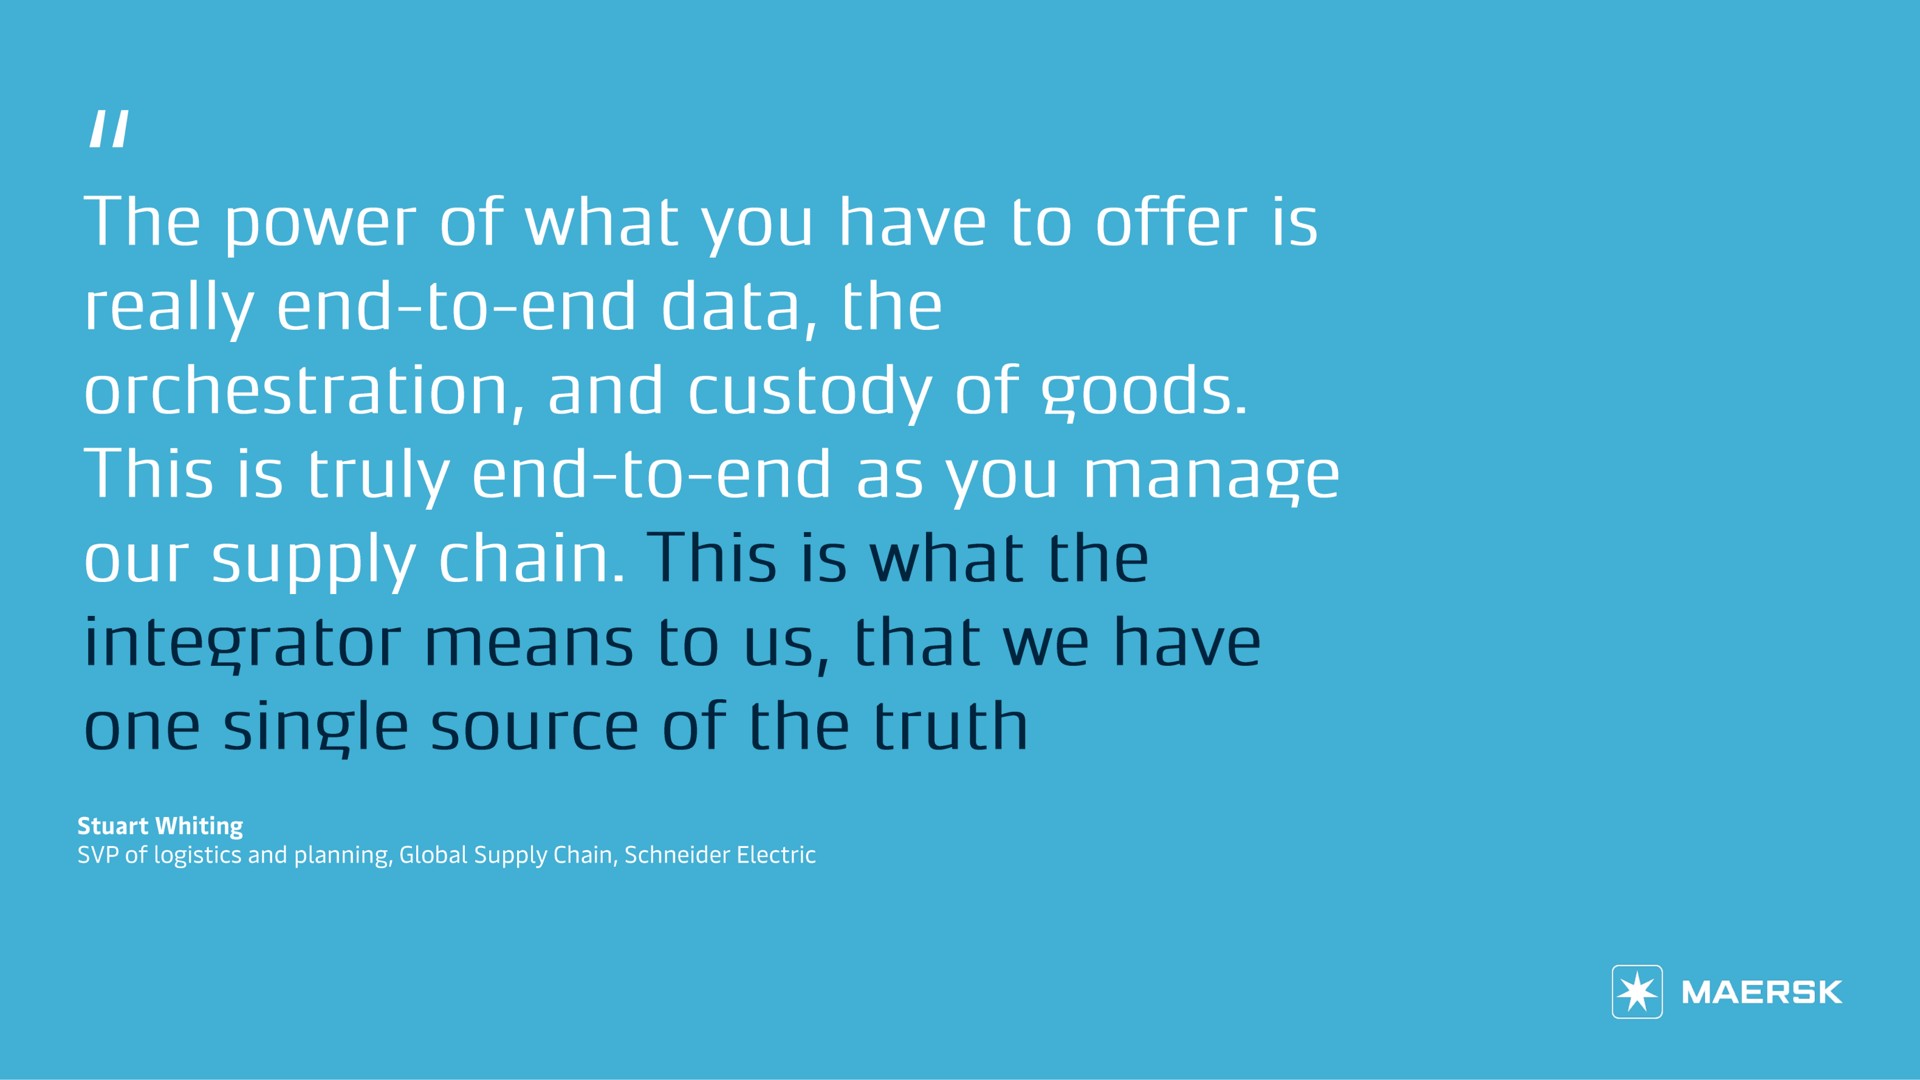 the power of what you have to offer is really end to end data the orchestration and custody of goods this is truly end to end as you manage our supply chain | Maersk